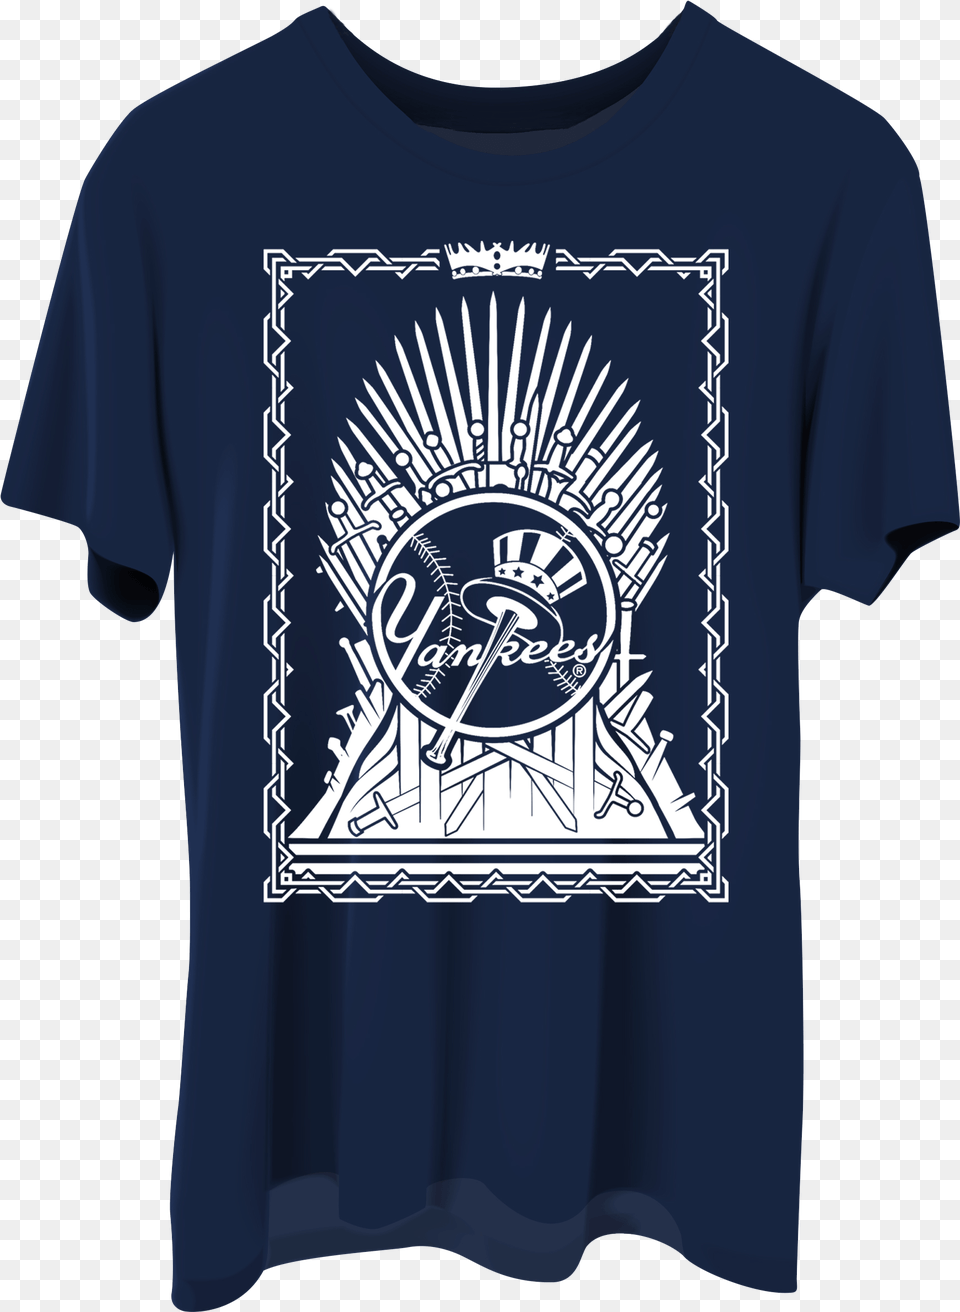 Yankees Individual Game Tickets For May 17 2019 New York New York Yankees Game Of Thrones Shirt, Clothing, T-shirt Free Png Download